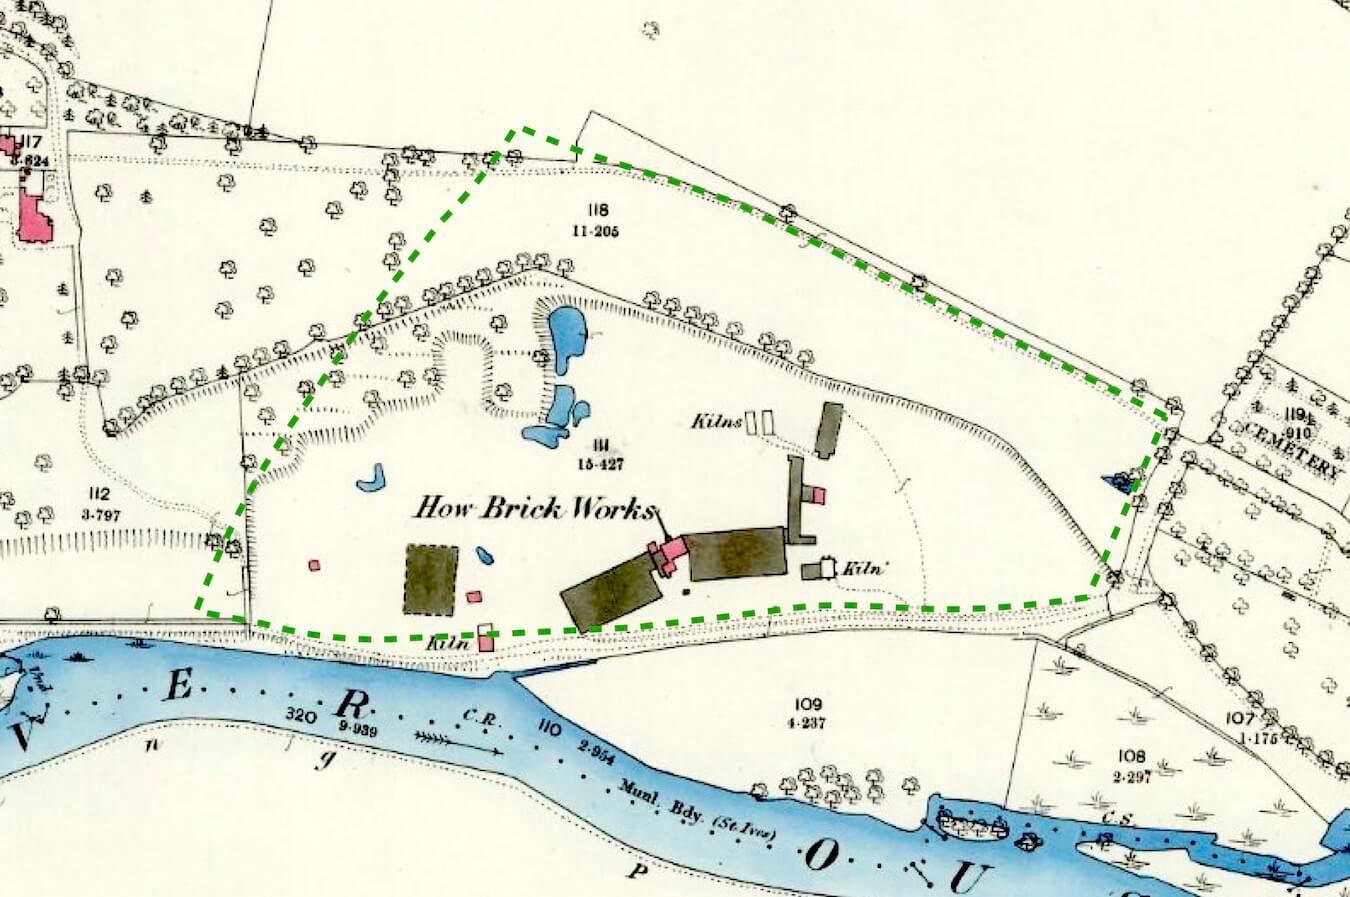 Map of How Brickworks, 1886